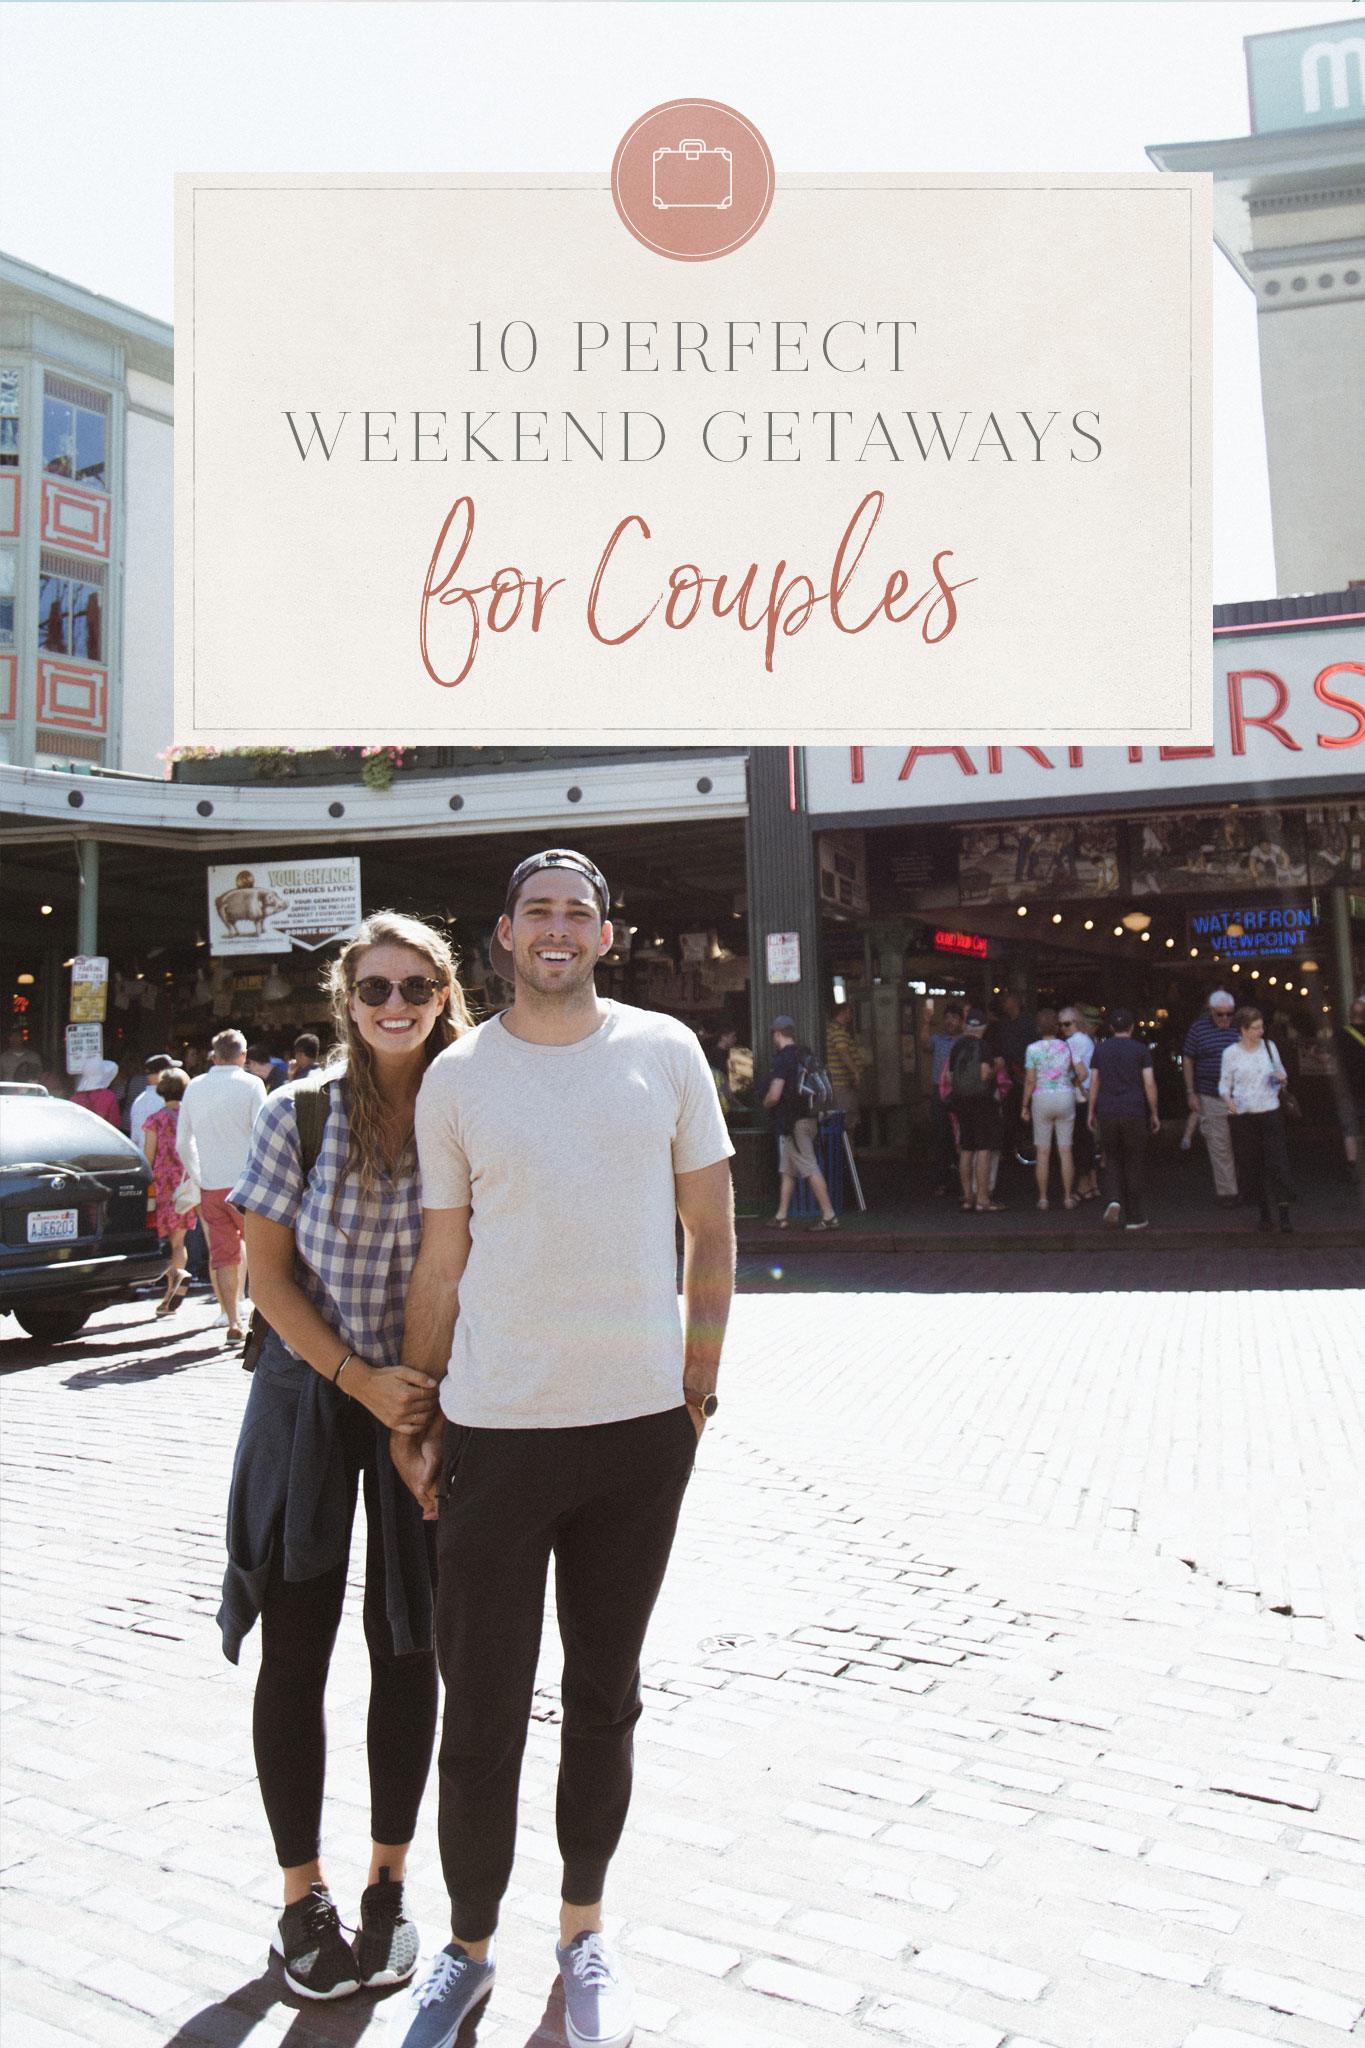 10 Perfect Weekend Getaways for Couples